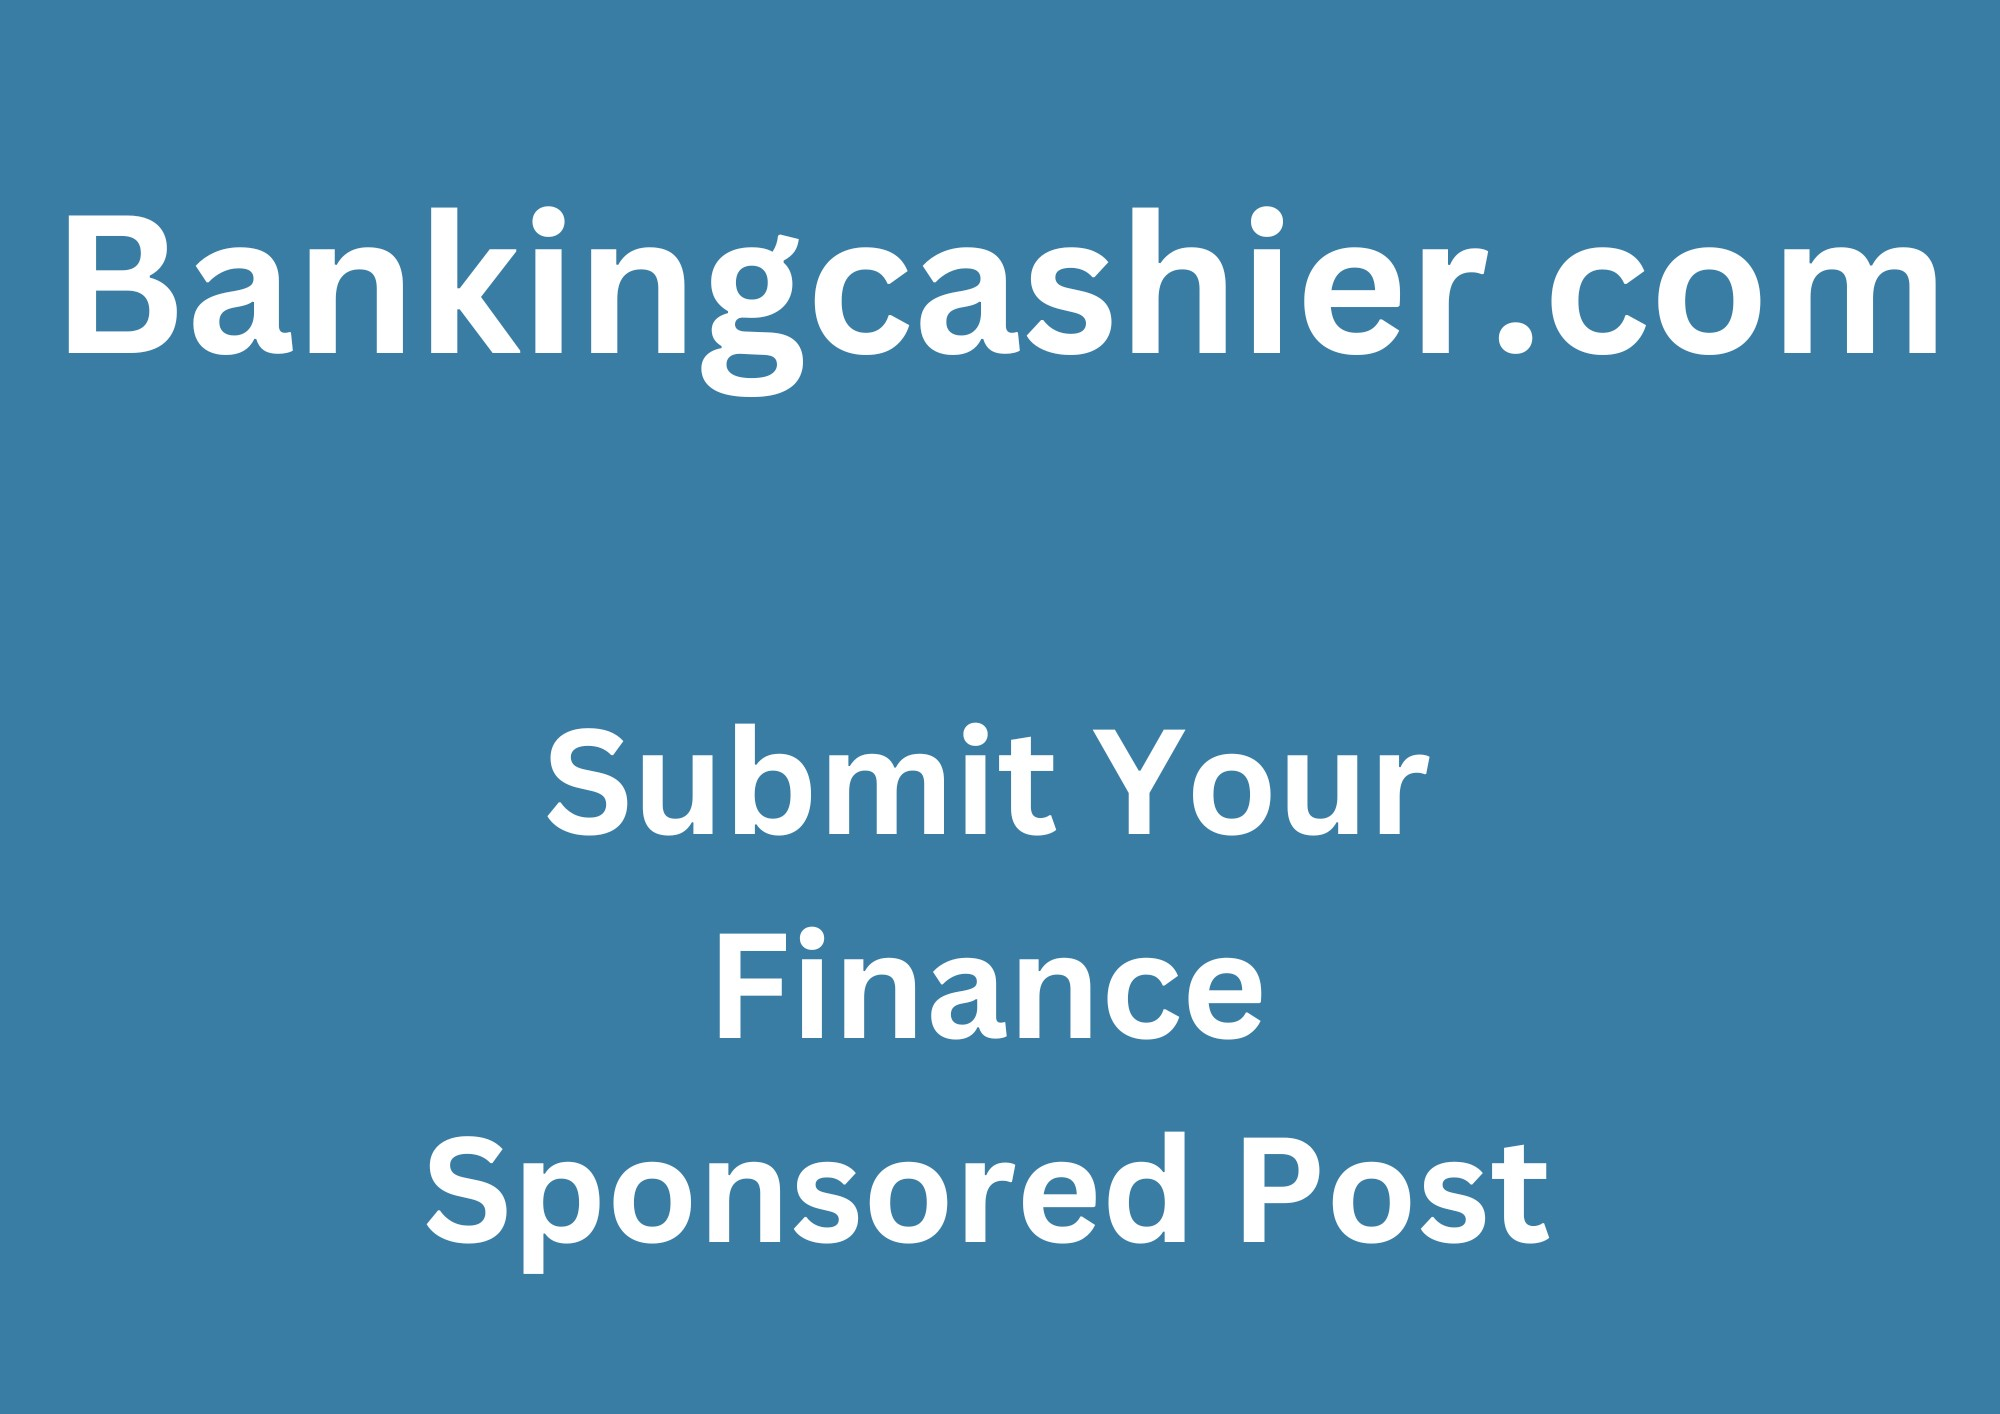 Bankingcashier.com - Submit Your Finance Sponsored Post